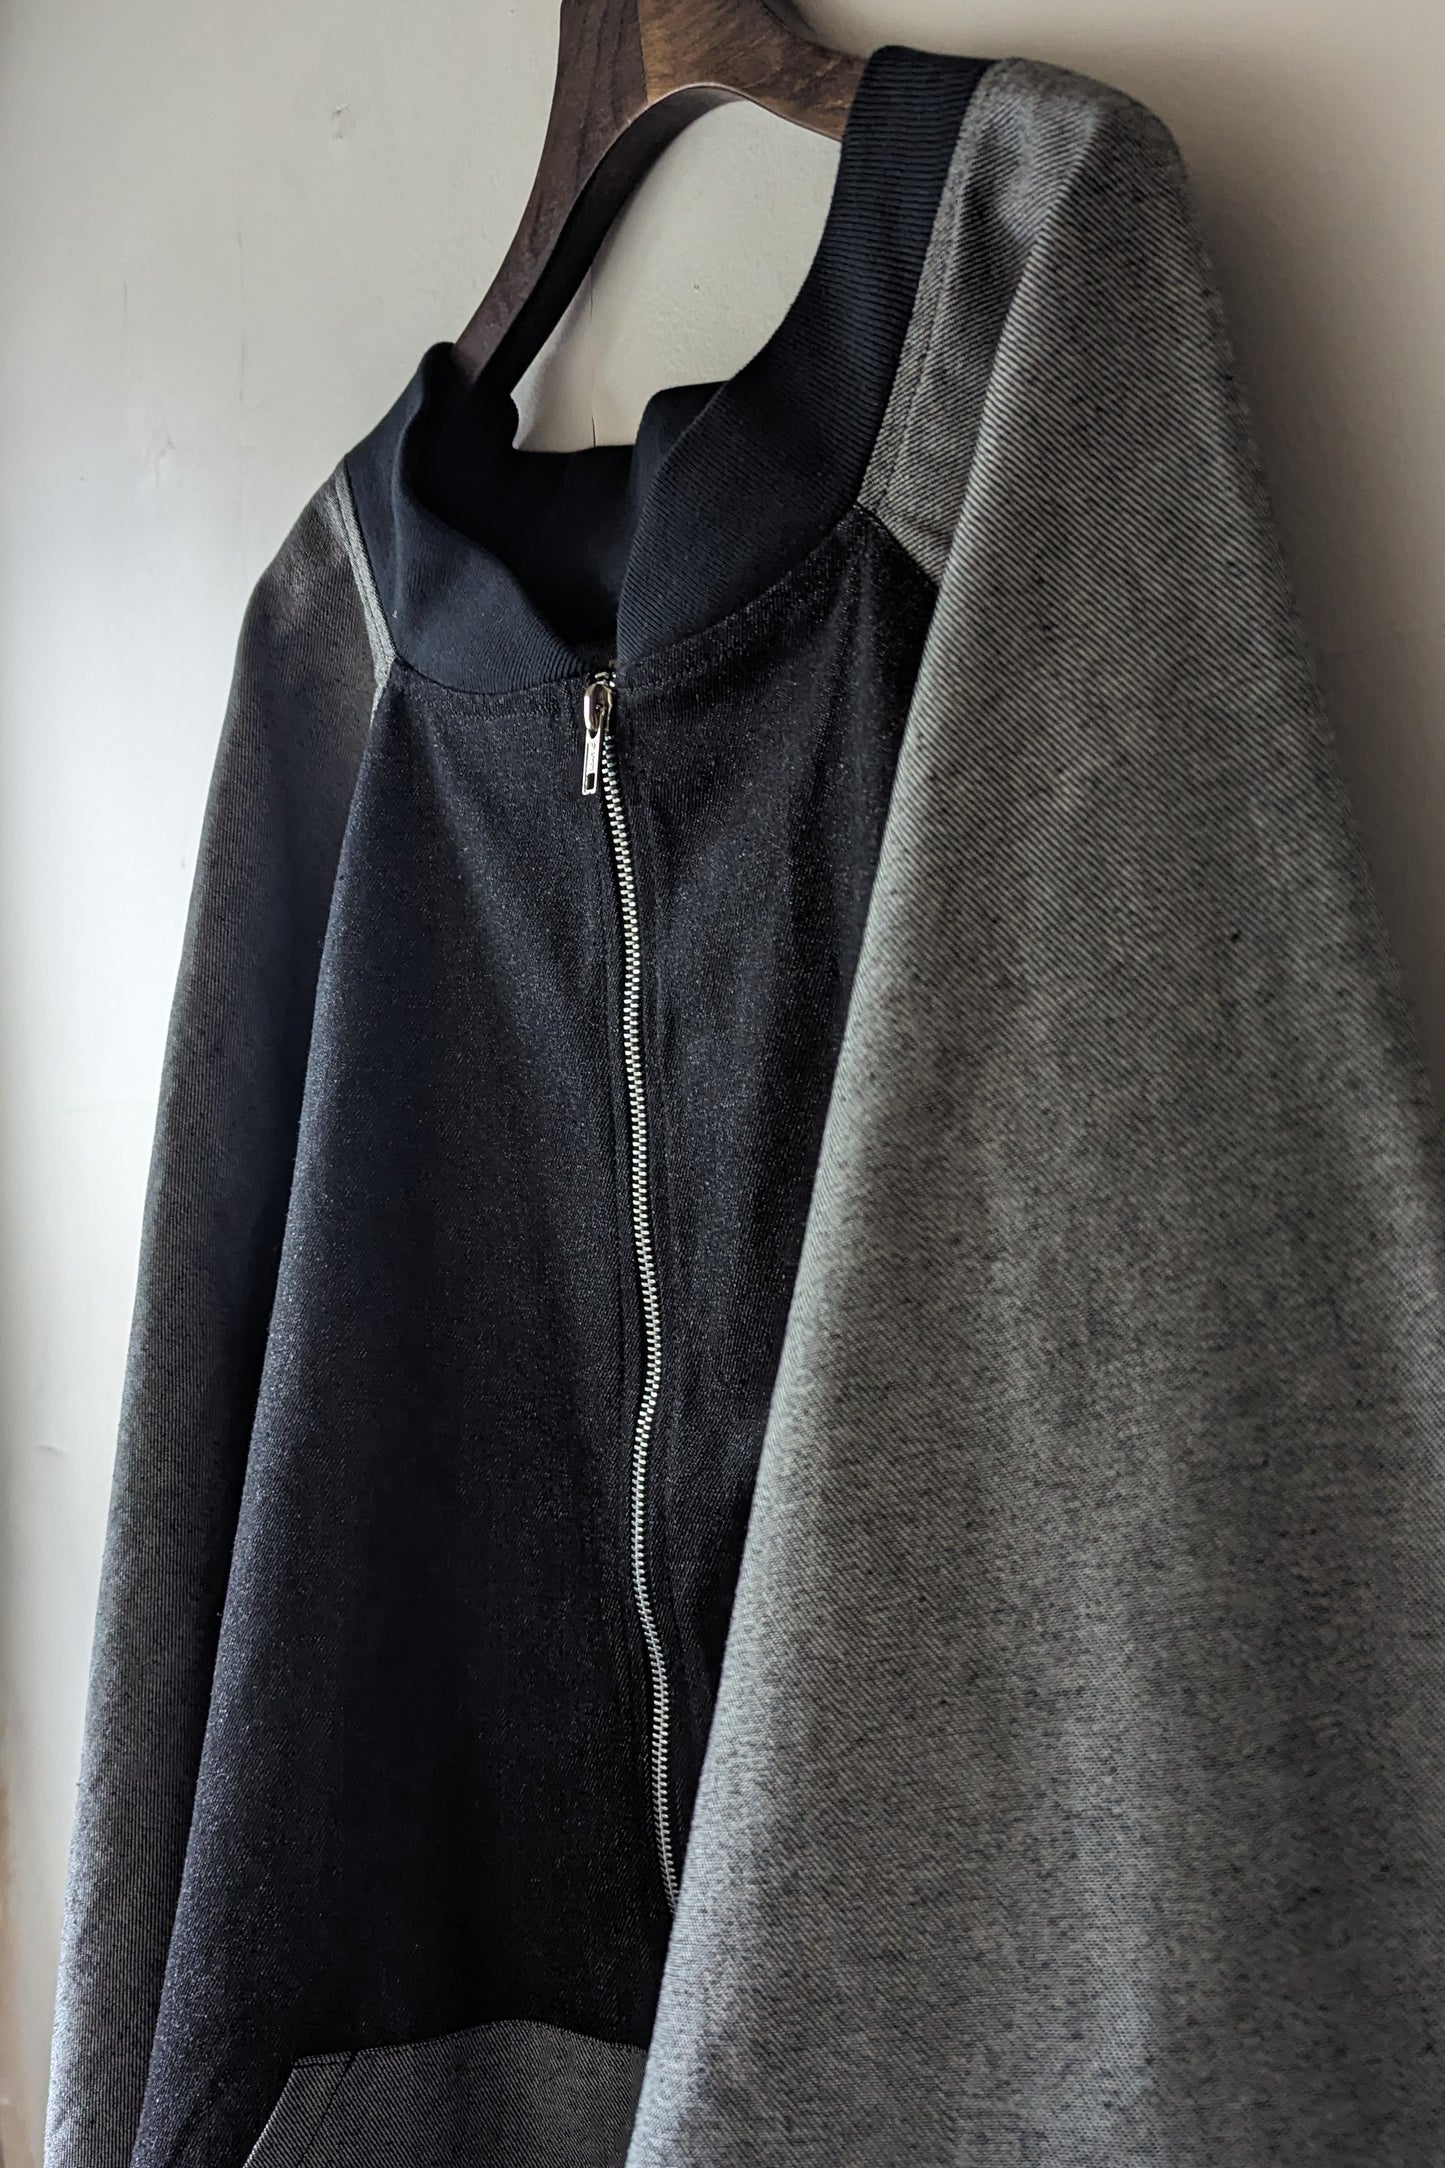 Colour Block Roscoe Bomber Jacket in Japanese Raw Denim by Connally Goods